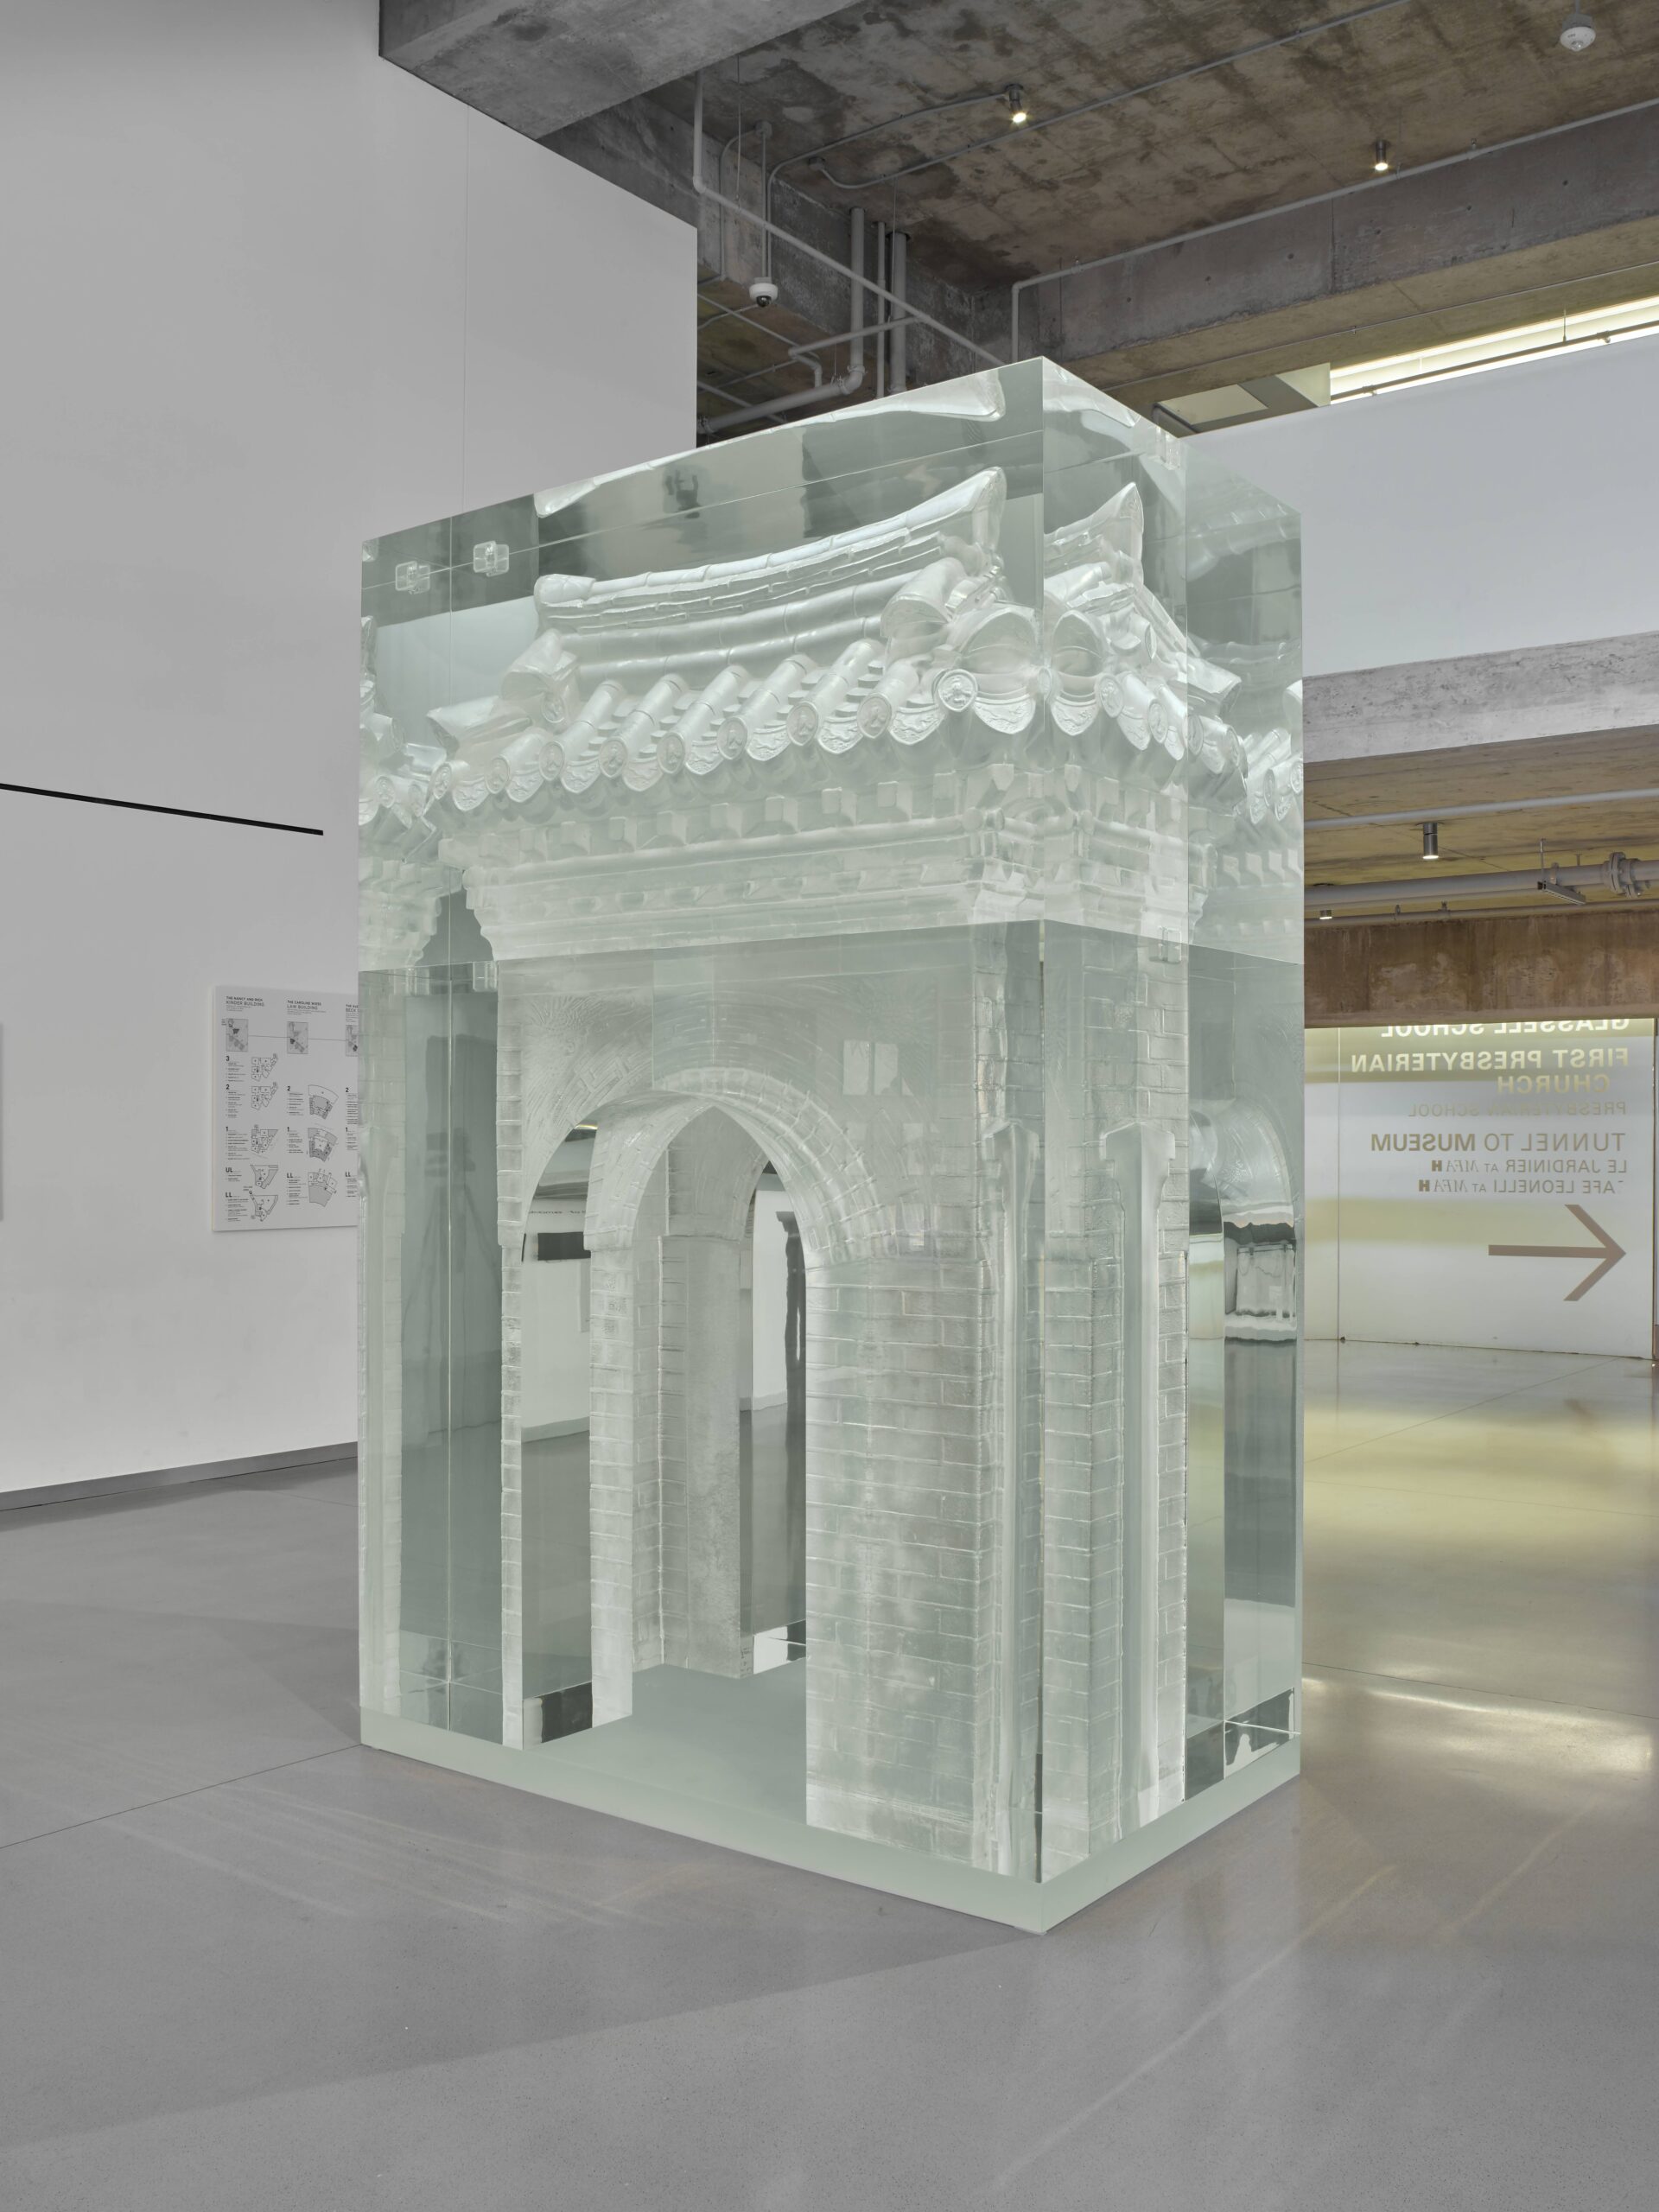 The MFAH Unveils Do Ho Suh’s “Portal”: A Gateway of Memory and Transition